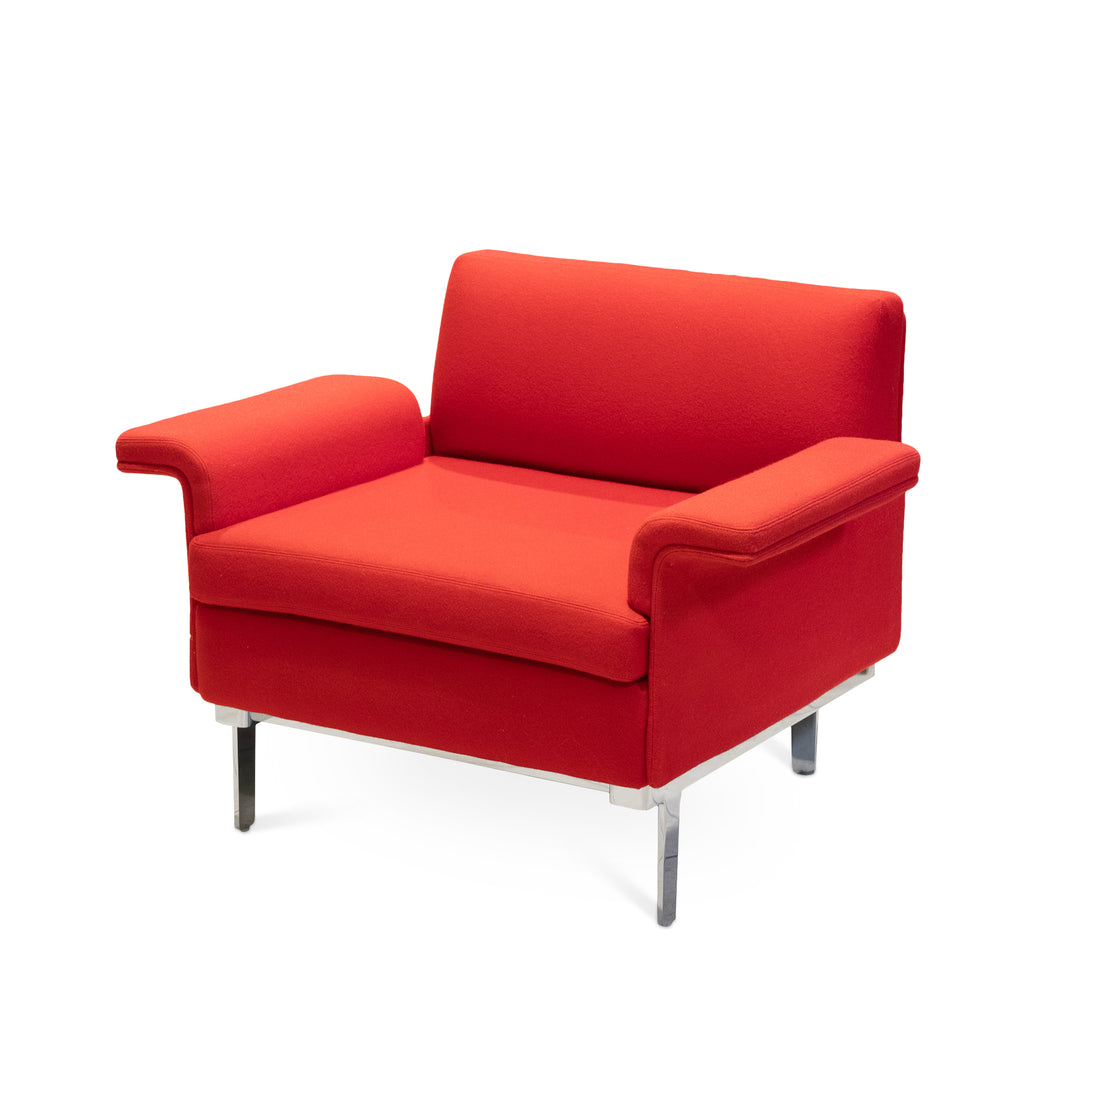 TEKNION Envita Chrome Chairs with Red Upholstery - Set of 2